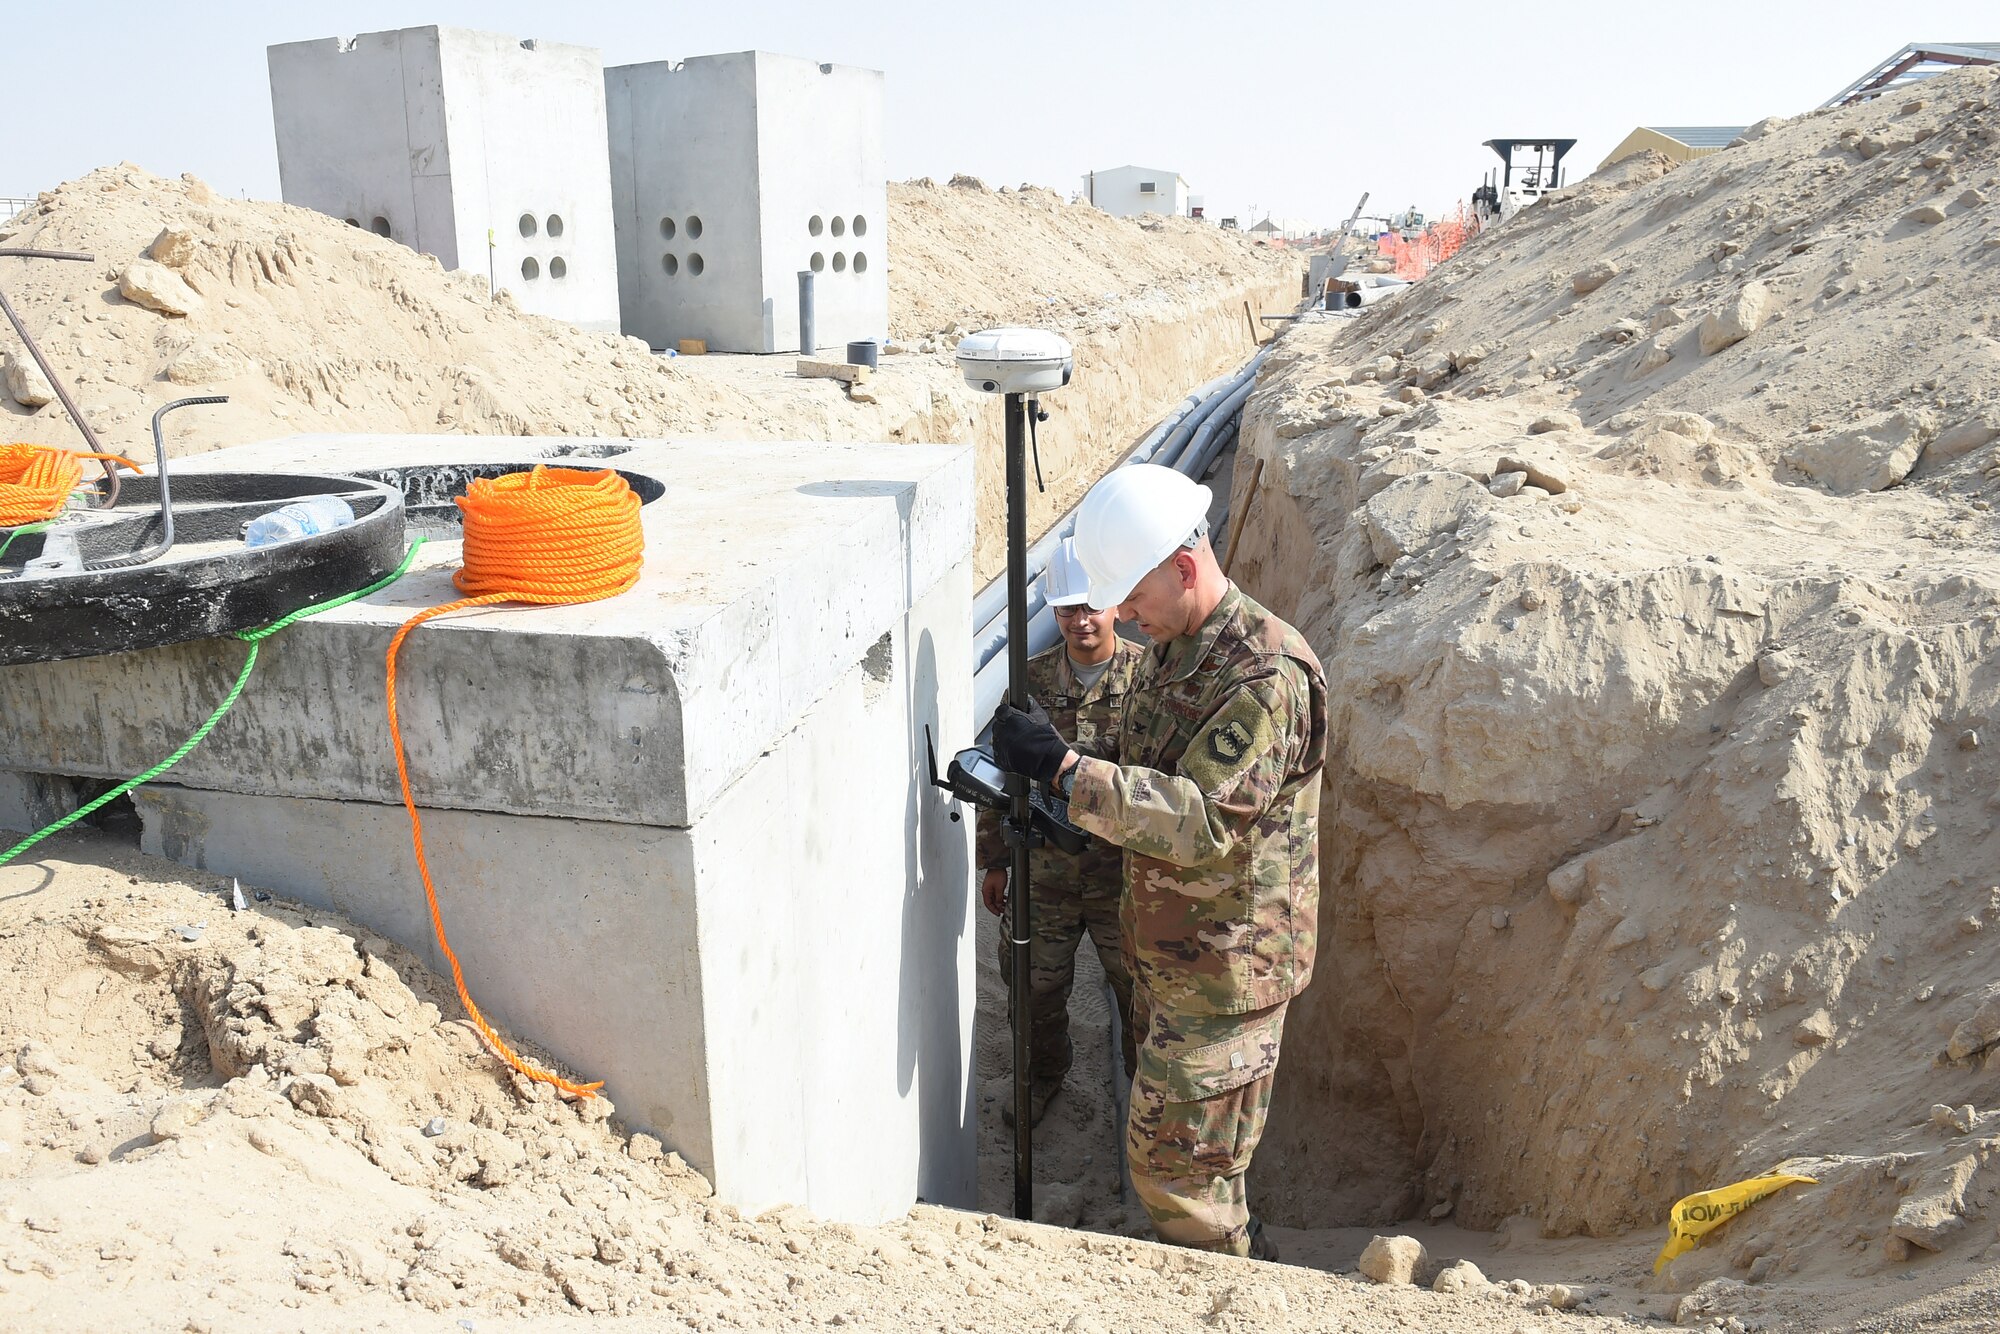 Three Airmen use an engineering tool outside.